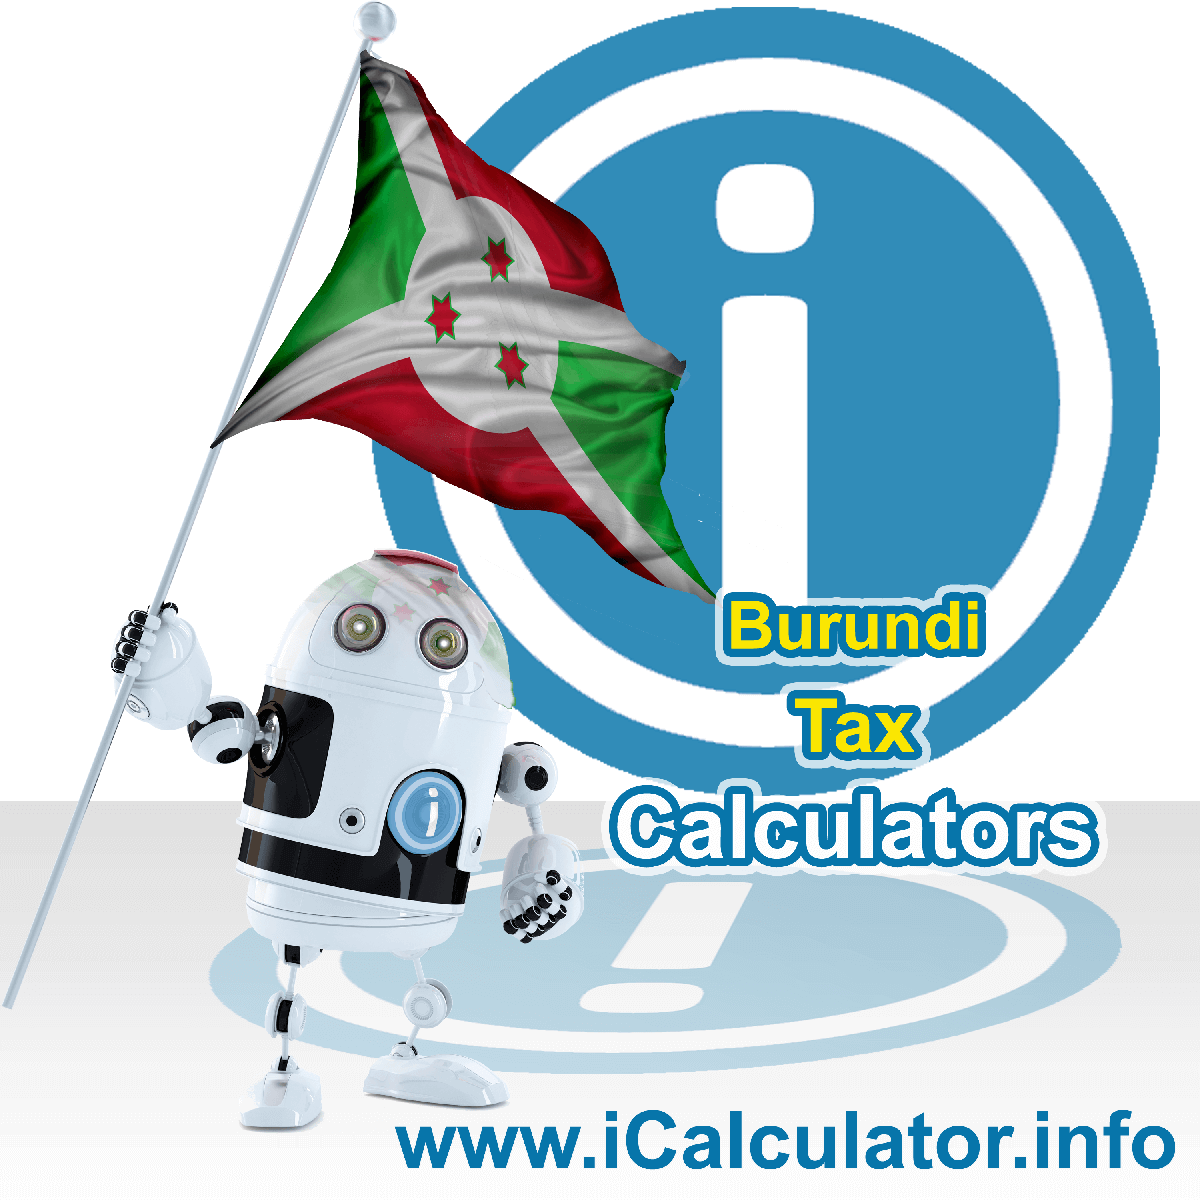 Burundi Capital Gains Tax Calculator. This image shows the Burundi flag and information relating to the capital gains tax rate formula used for calculating Capital Gains Tax in Burundi using the Burundi Capital Gains Tax Calculator in 2023